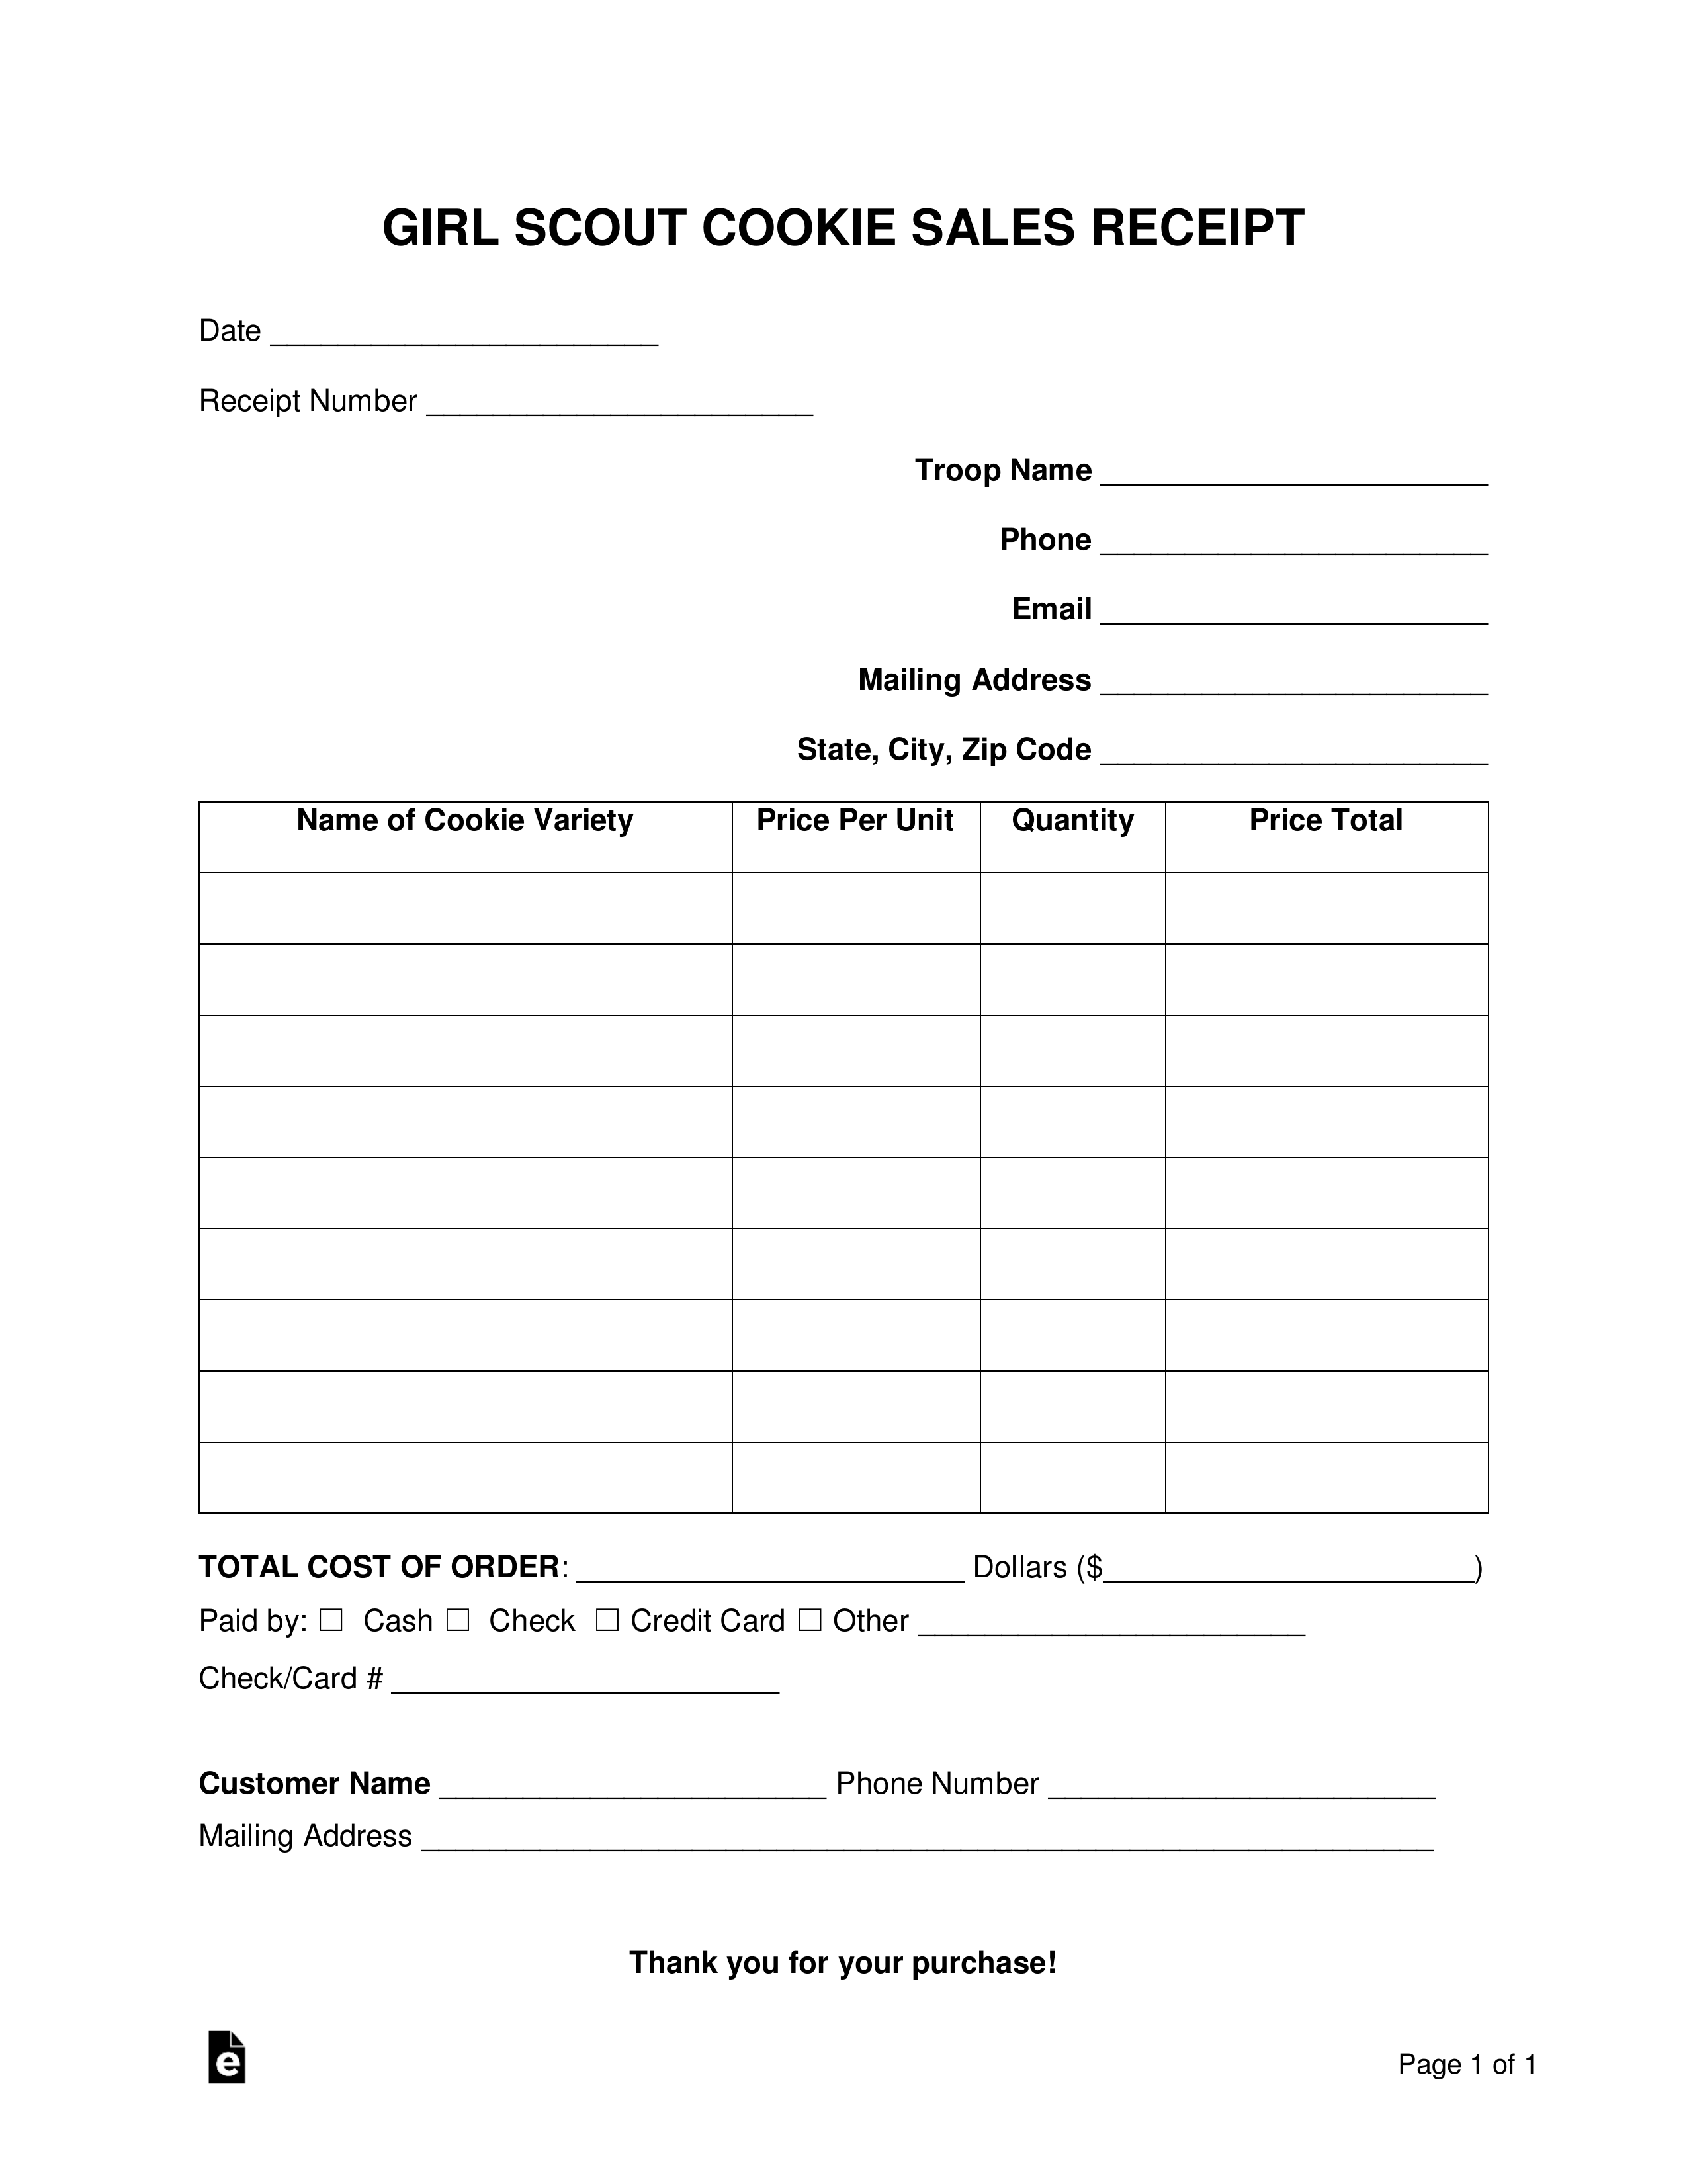 Printable Girl Scout Cookie Order Form 2020 Pdf TUTORE ORG Master Of Documents